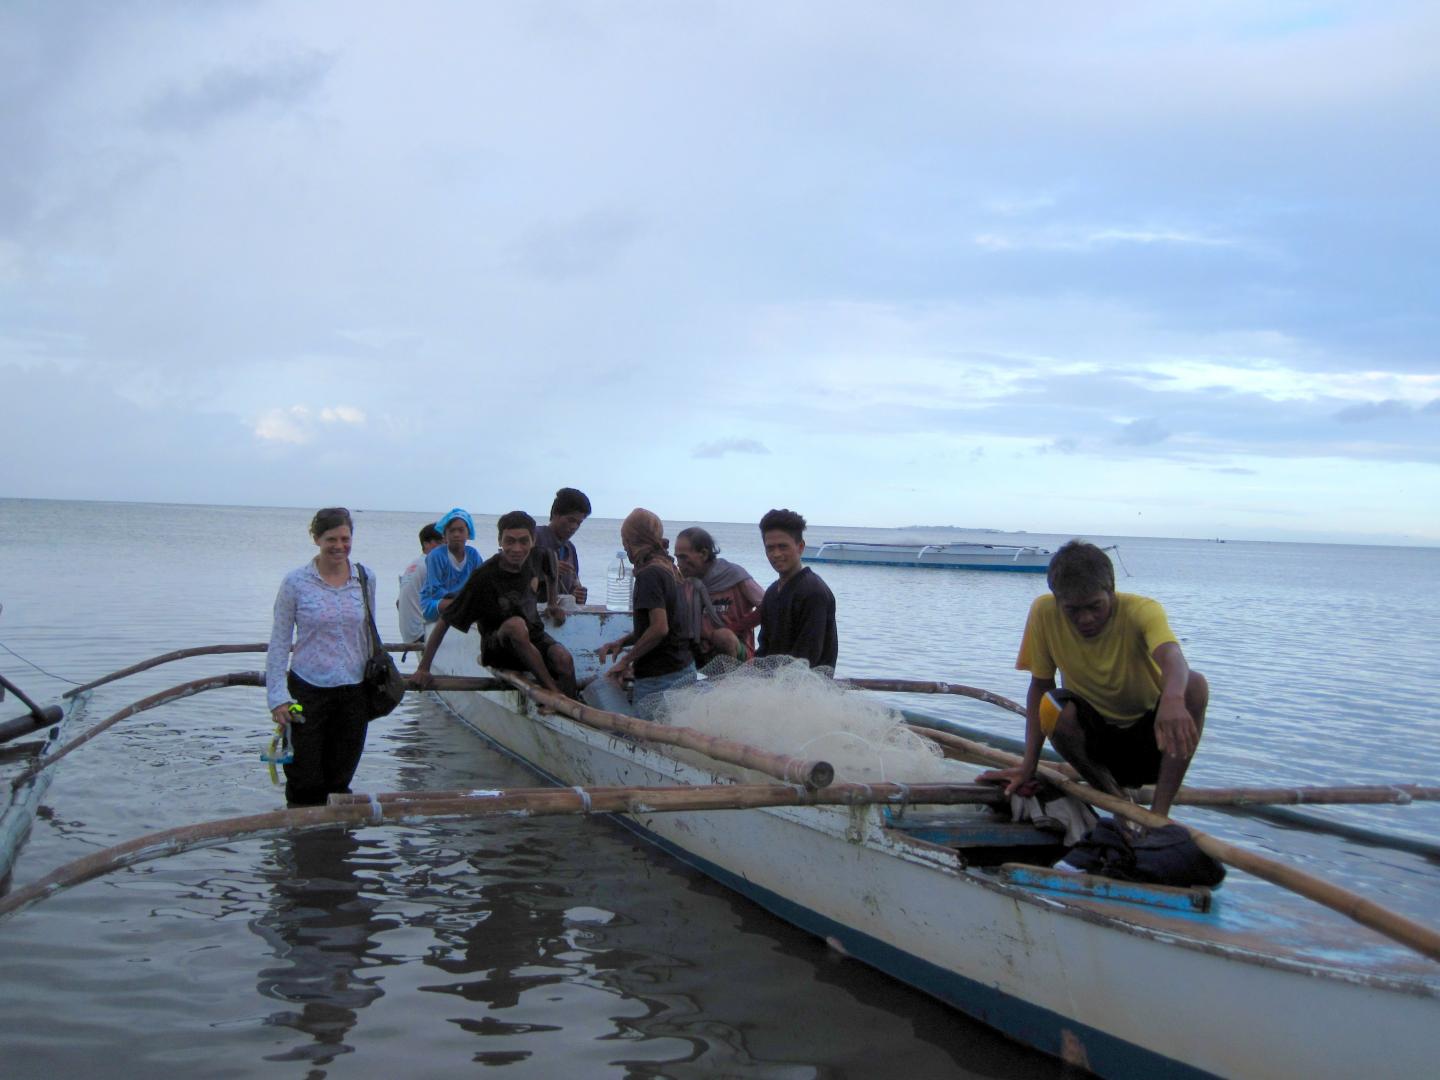 Fishing Methods Used in Small-scale Fisheries in Philippines